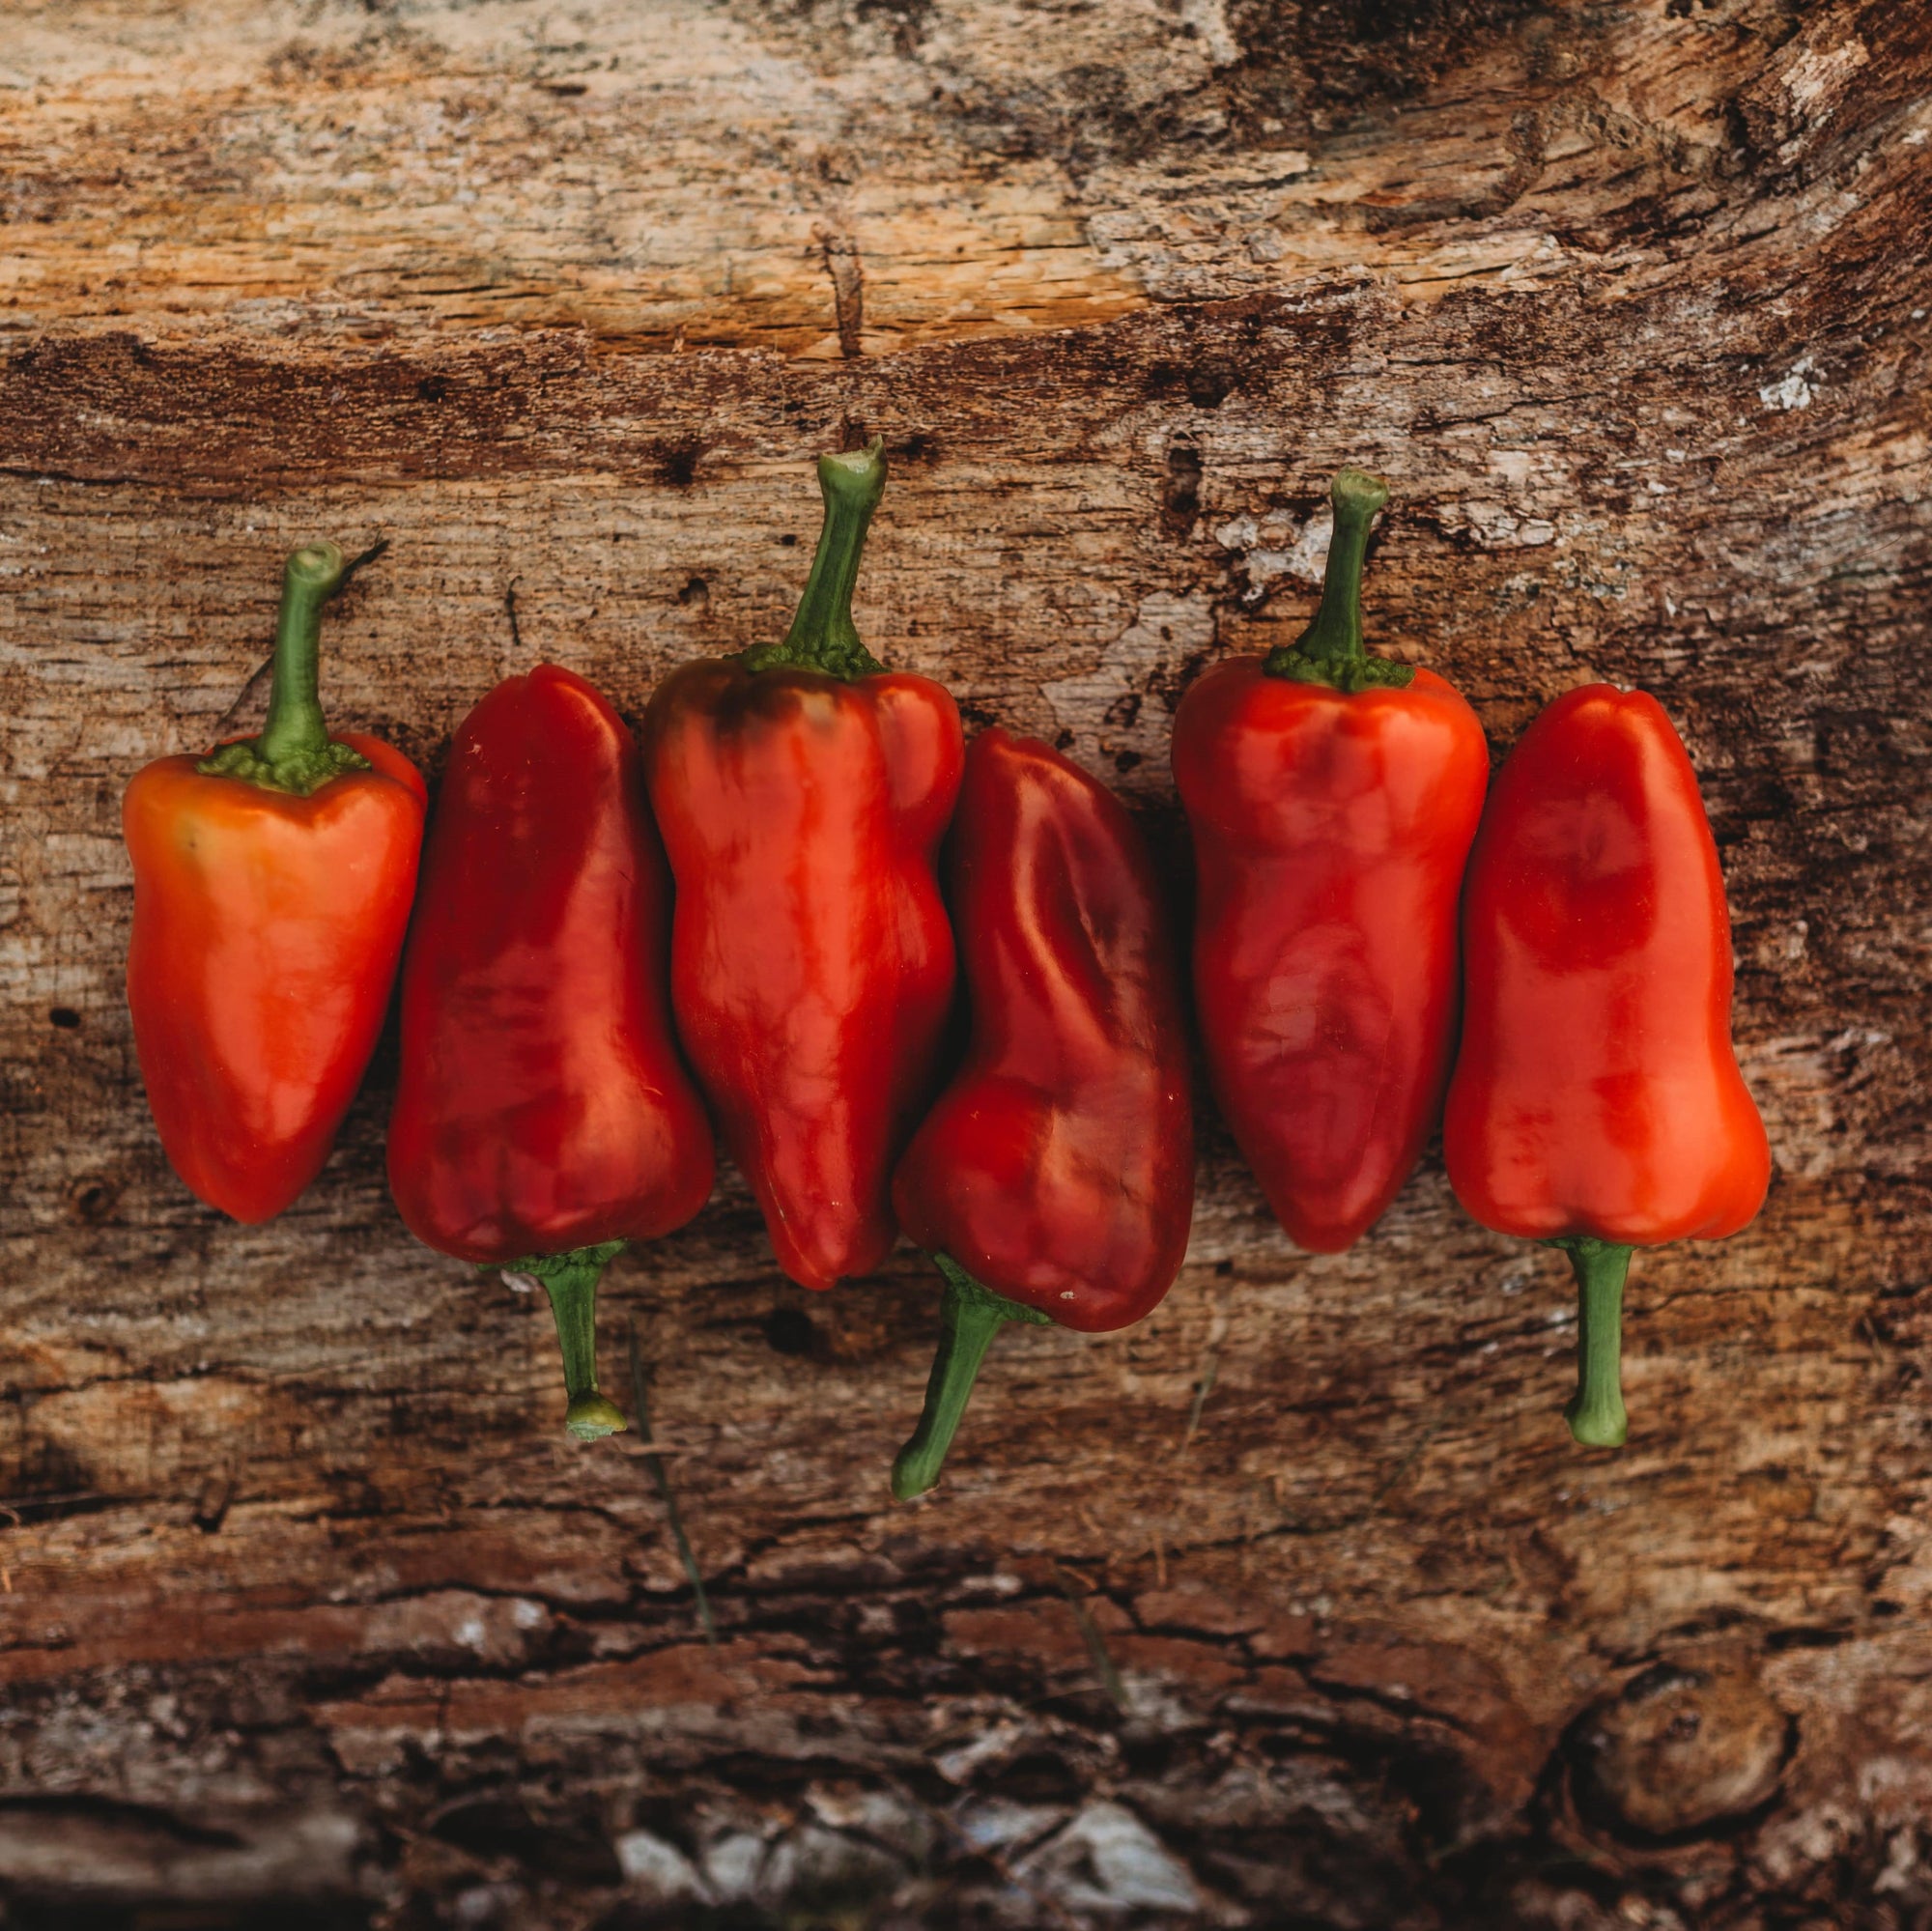 Red Spur Chile Peppers Information and Facts